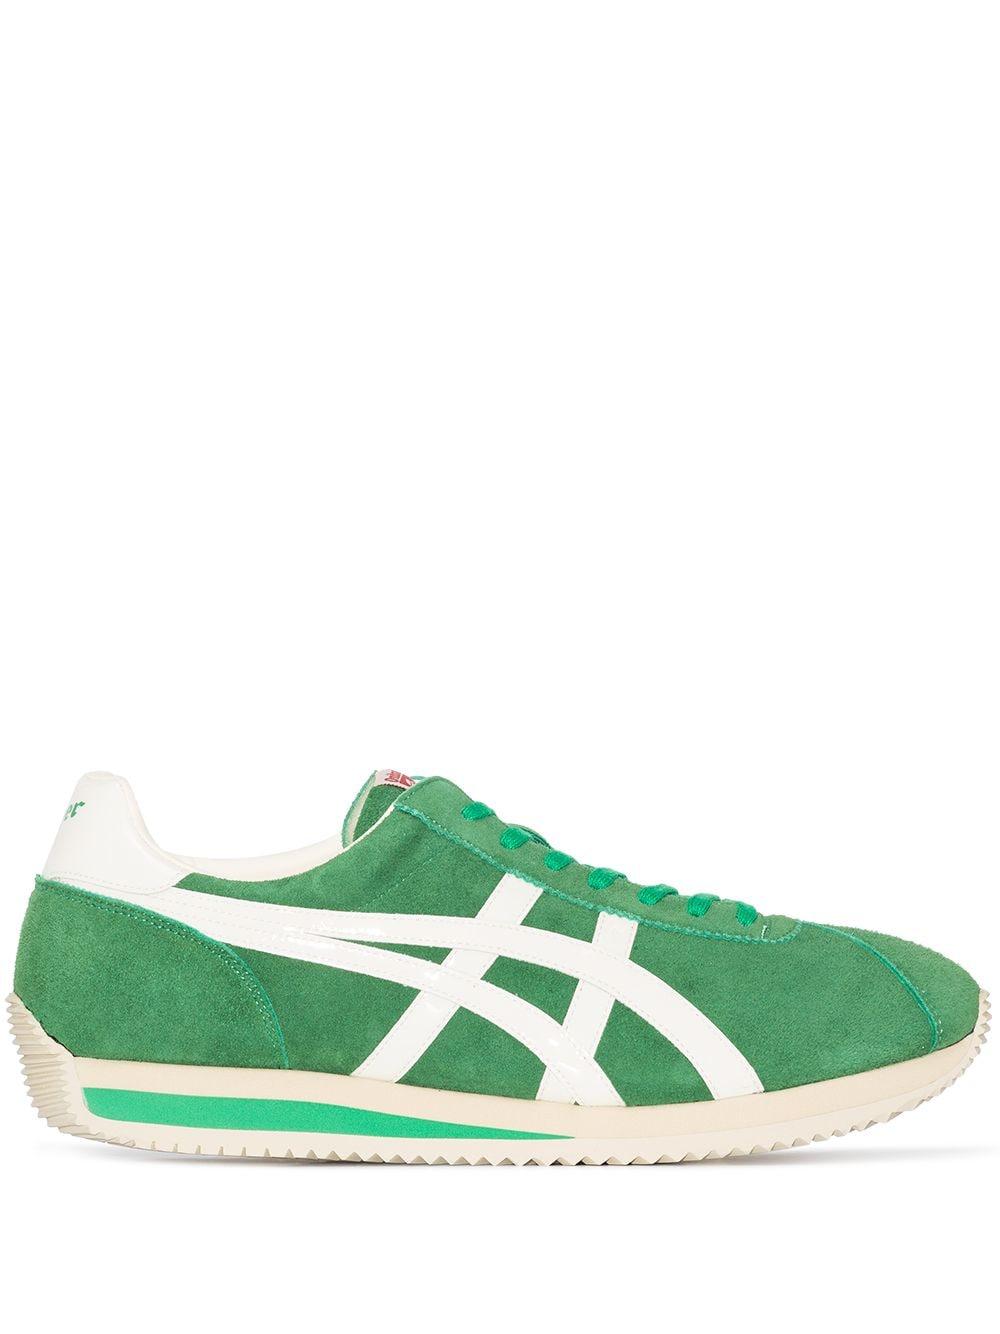 Onitsuka Tiger Moal 77 Nm Low-top Sneakers in Green for Men - Lyst